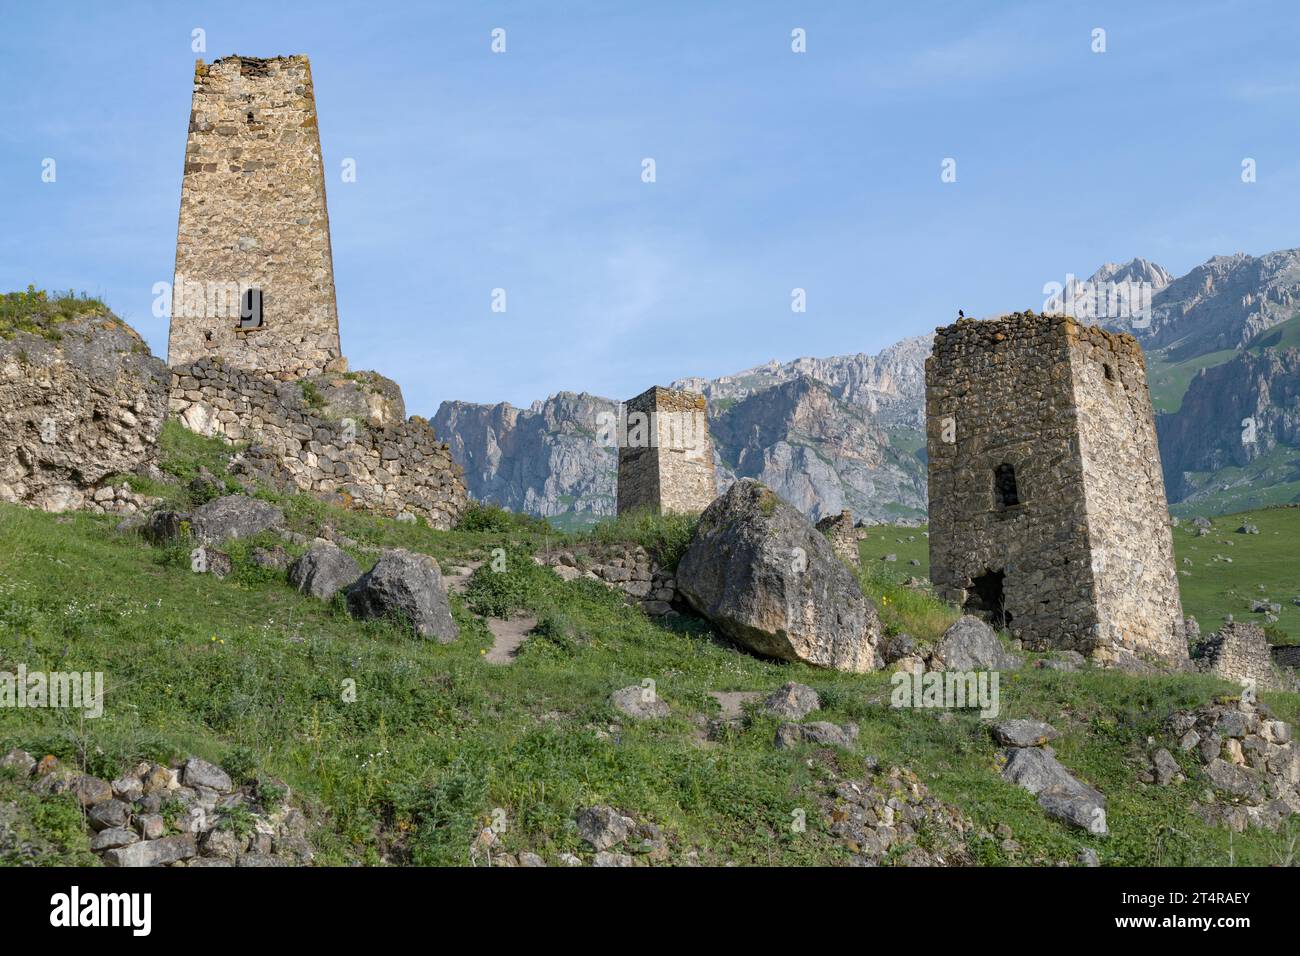 Ancient Ossetian defensive towers in the mountains of North Ossetia on a sunny June day. Tsmiti, North Ossetia-Alania. Russian Federation Stock Photo